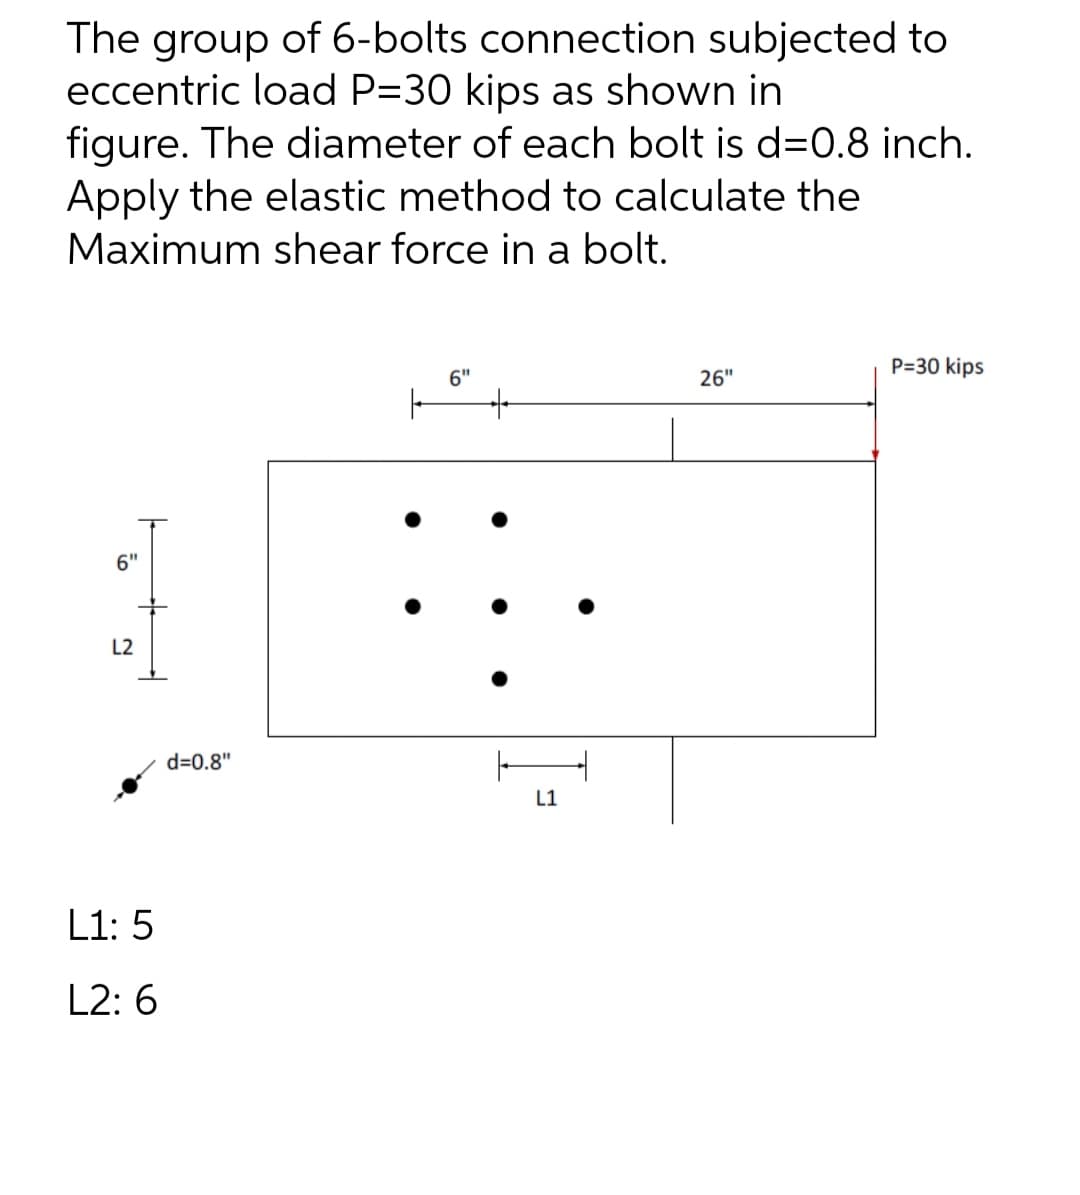 The group of 6-bolts connection subjected to
eccentric load P=30 kips as shown in
figure. The diameter of each bolt is d=0.8 inch.
Apply the elastic method to calculate the
Maximum shear force in a bolt.
6"
P=30 kips
26"
|
+
6"
L2
L1: 5
L2: 6
d=0.8"
L1